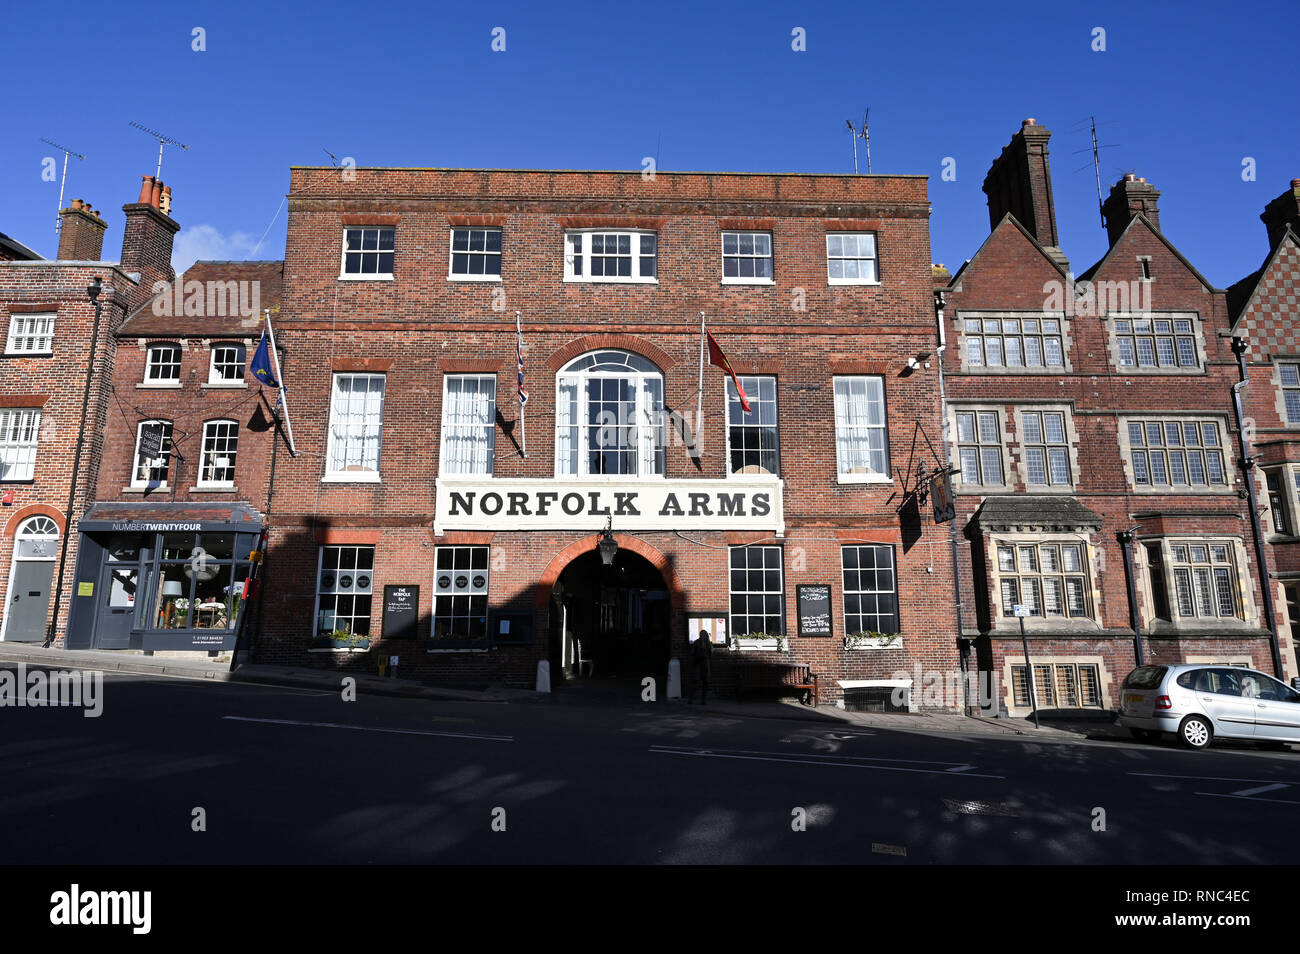 Arundel views in West Sussex UK - The Norfolk Arms hotel and restaurant Stock Photo